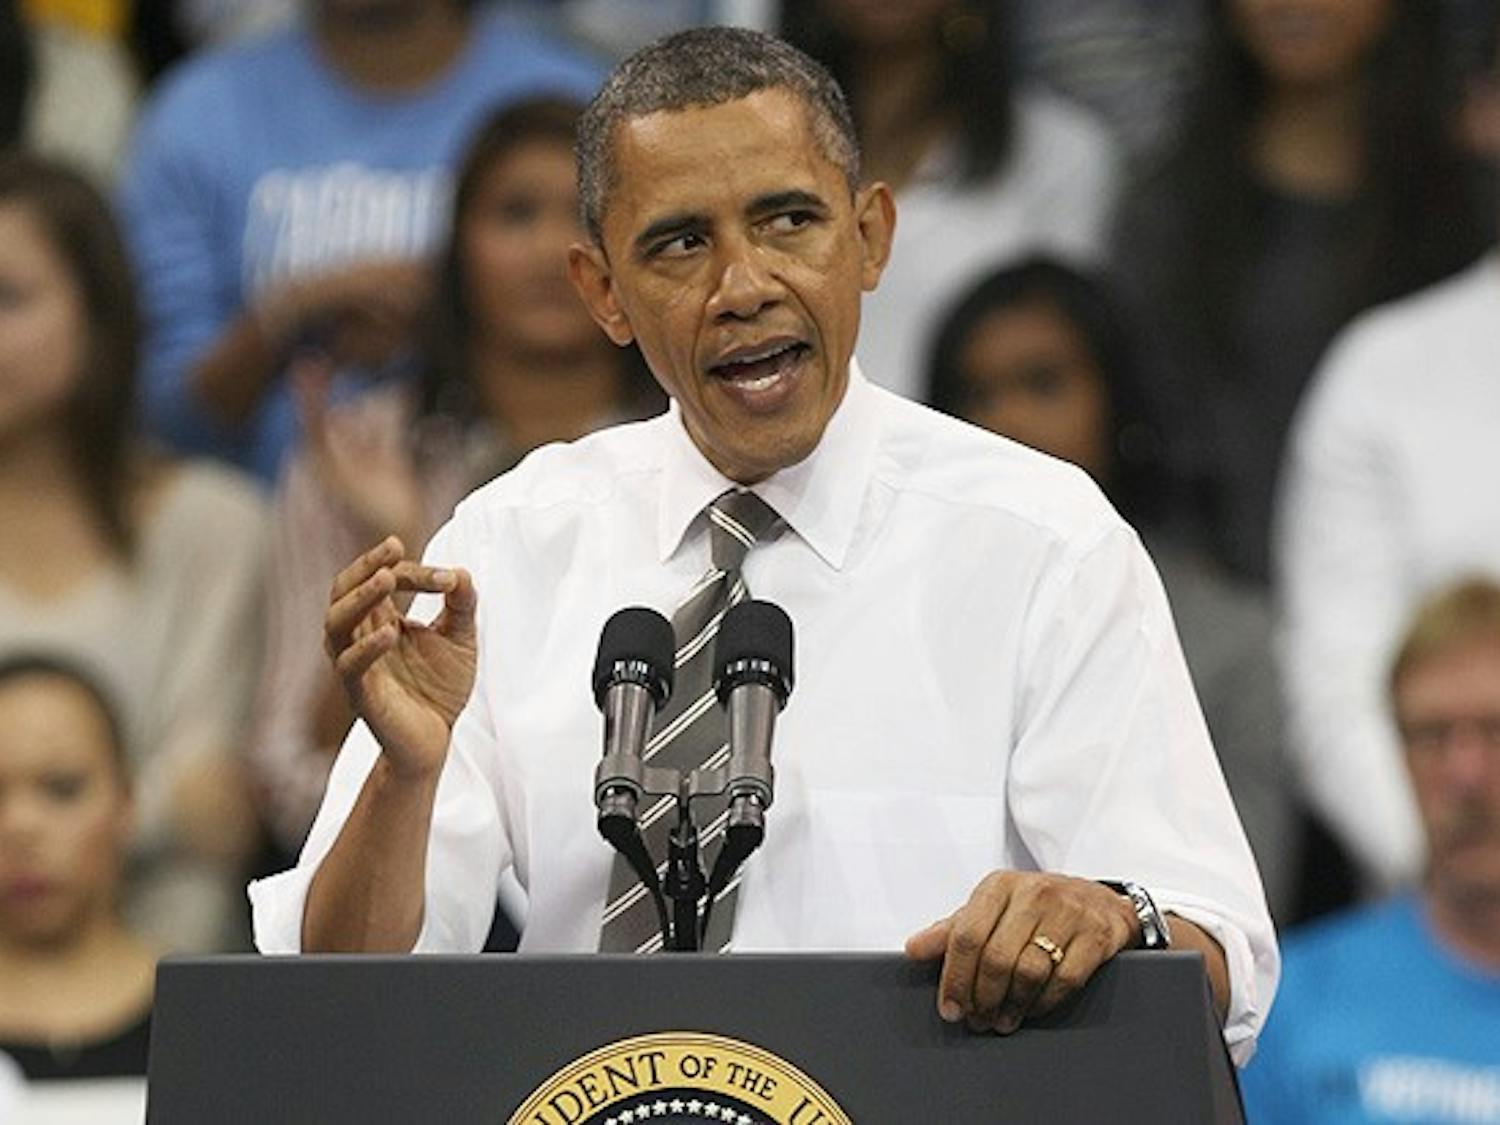 President Barack Obama addresses a large crowd at the University of North Carolina at Chapel Hill Tuesday.